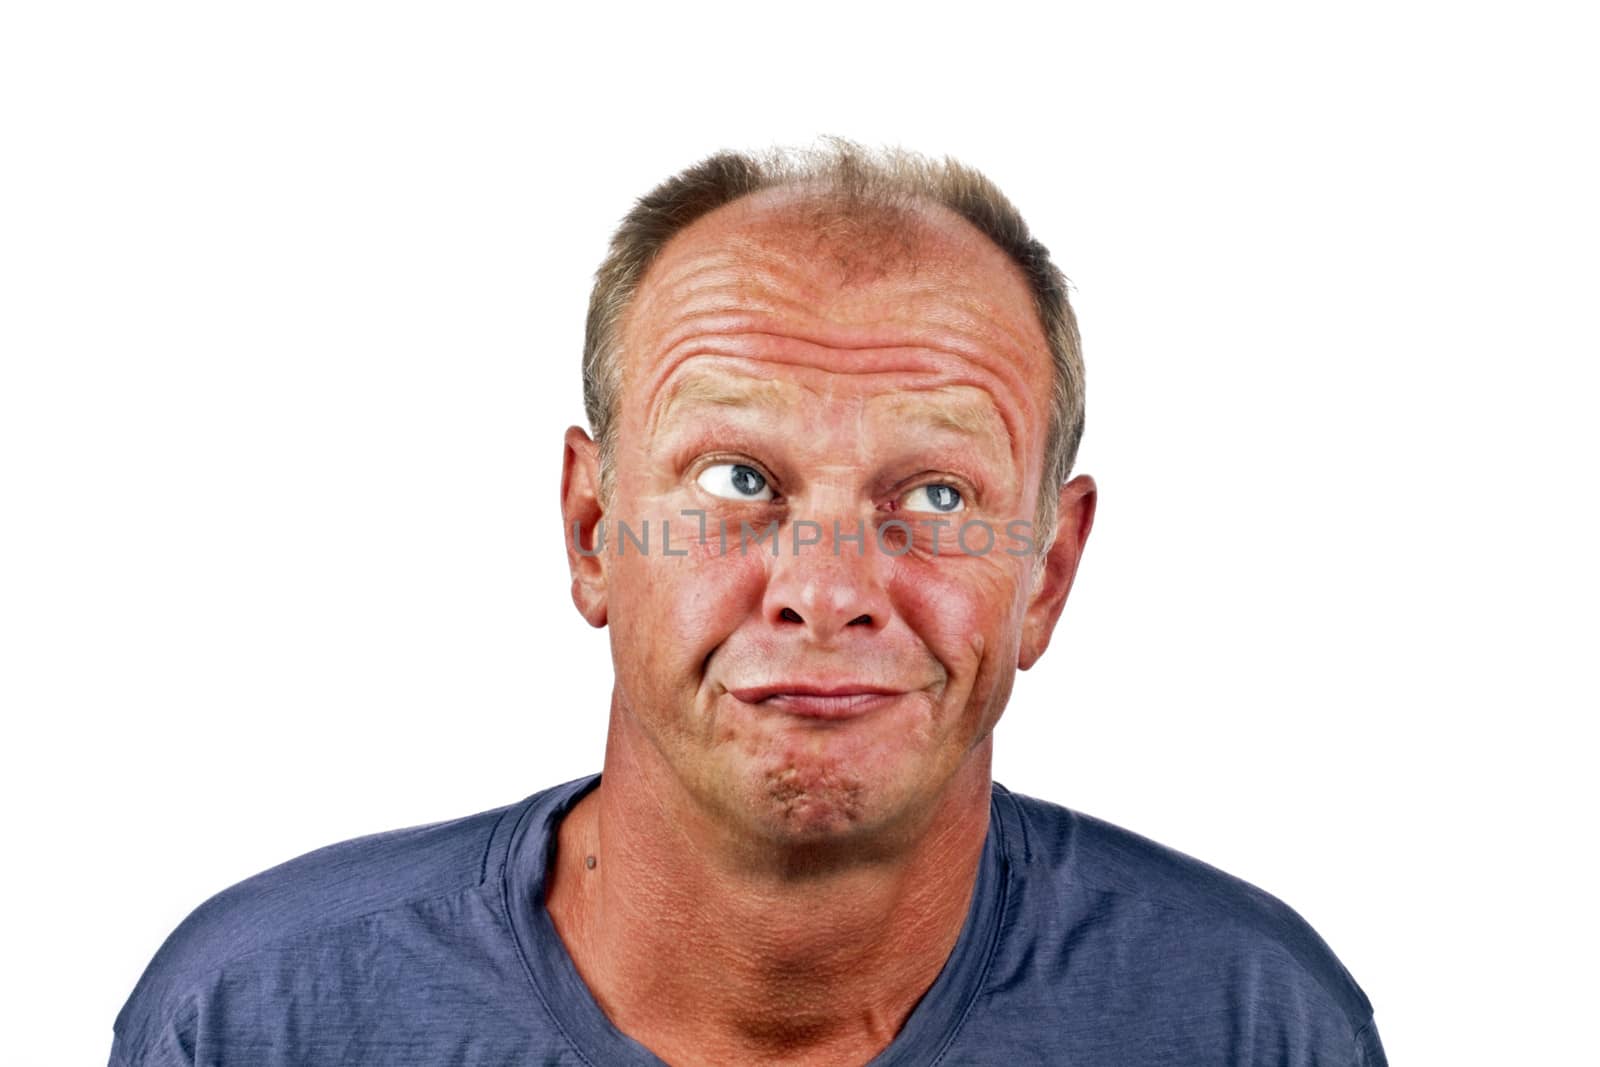 Astonished looking man on a white background by devy